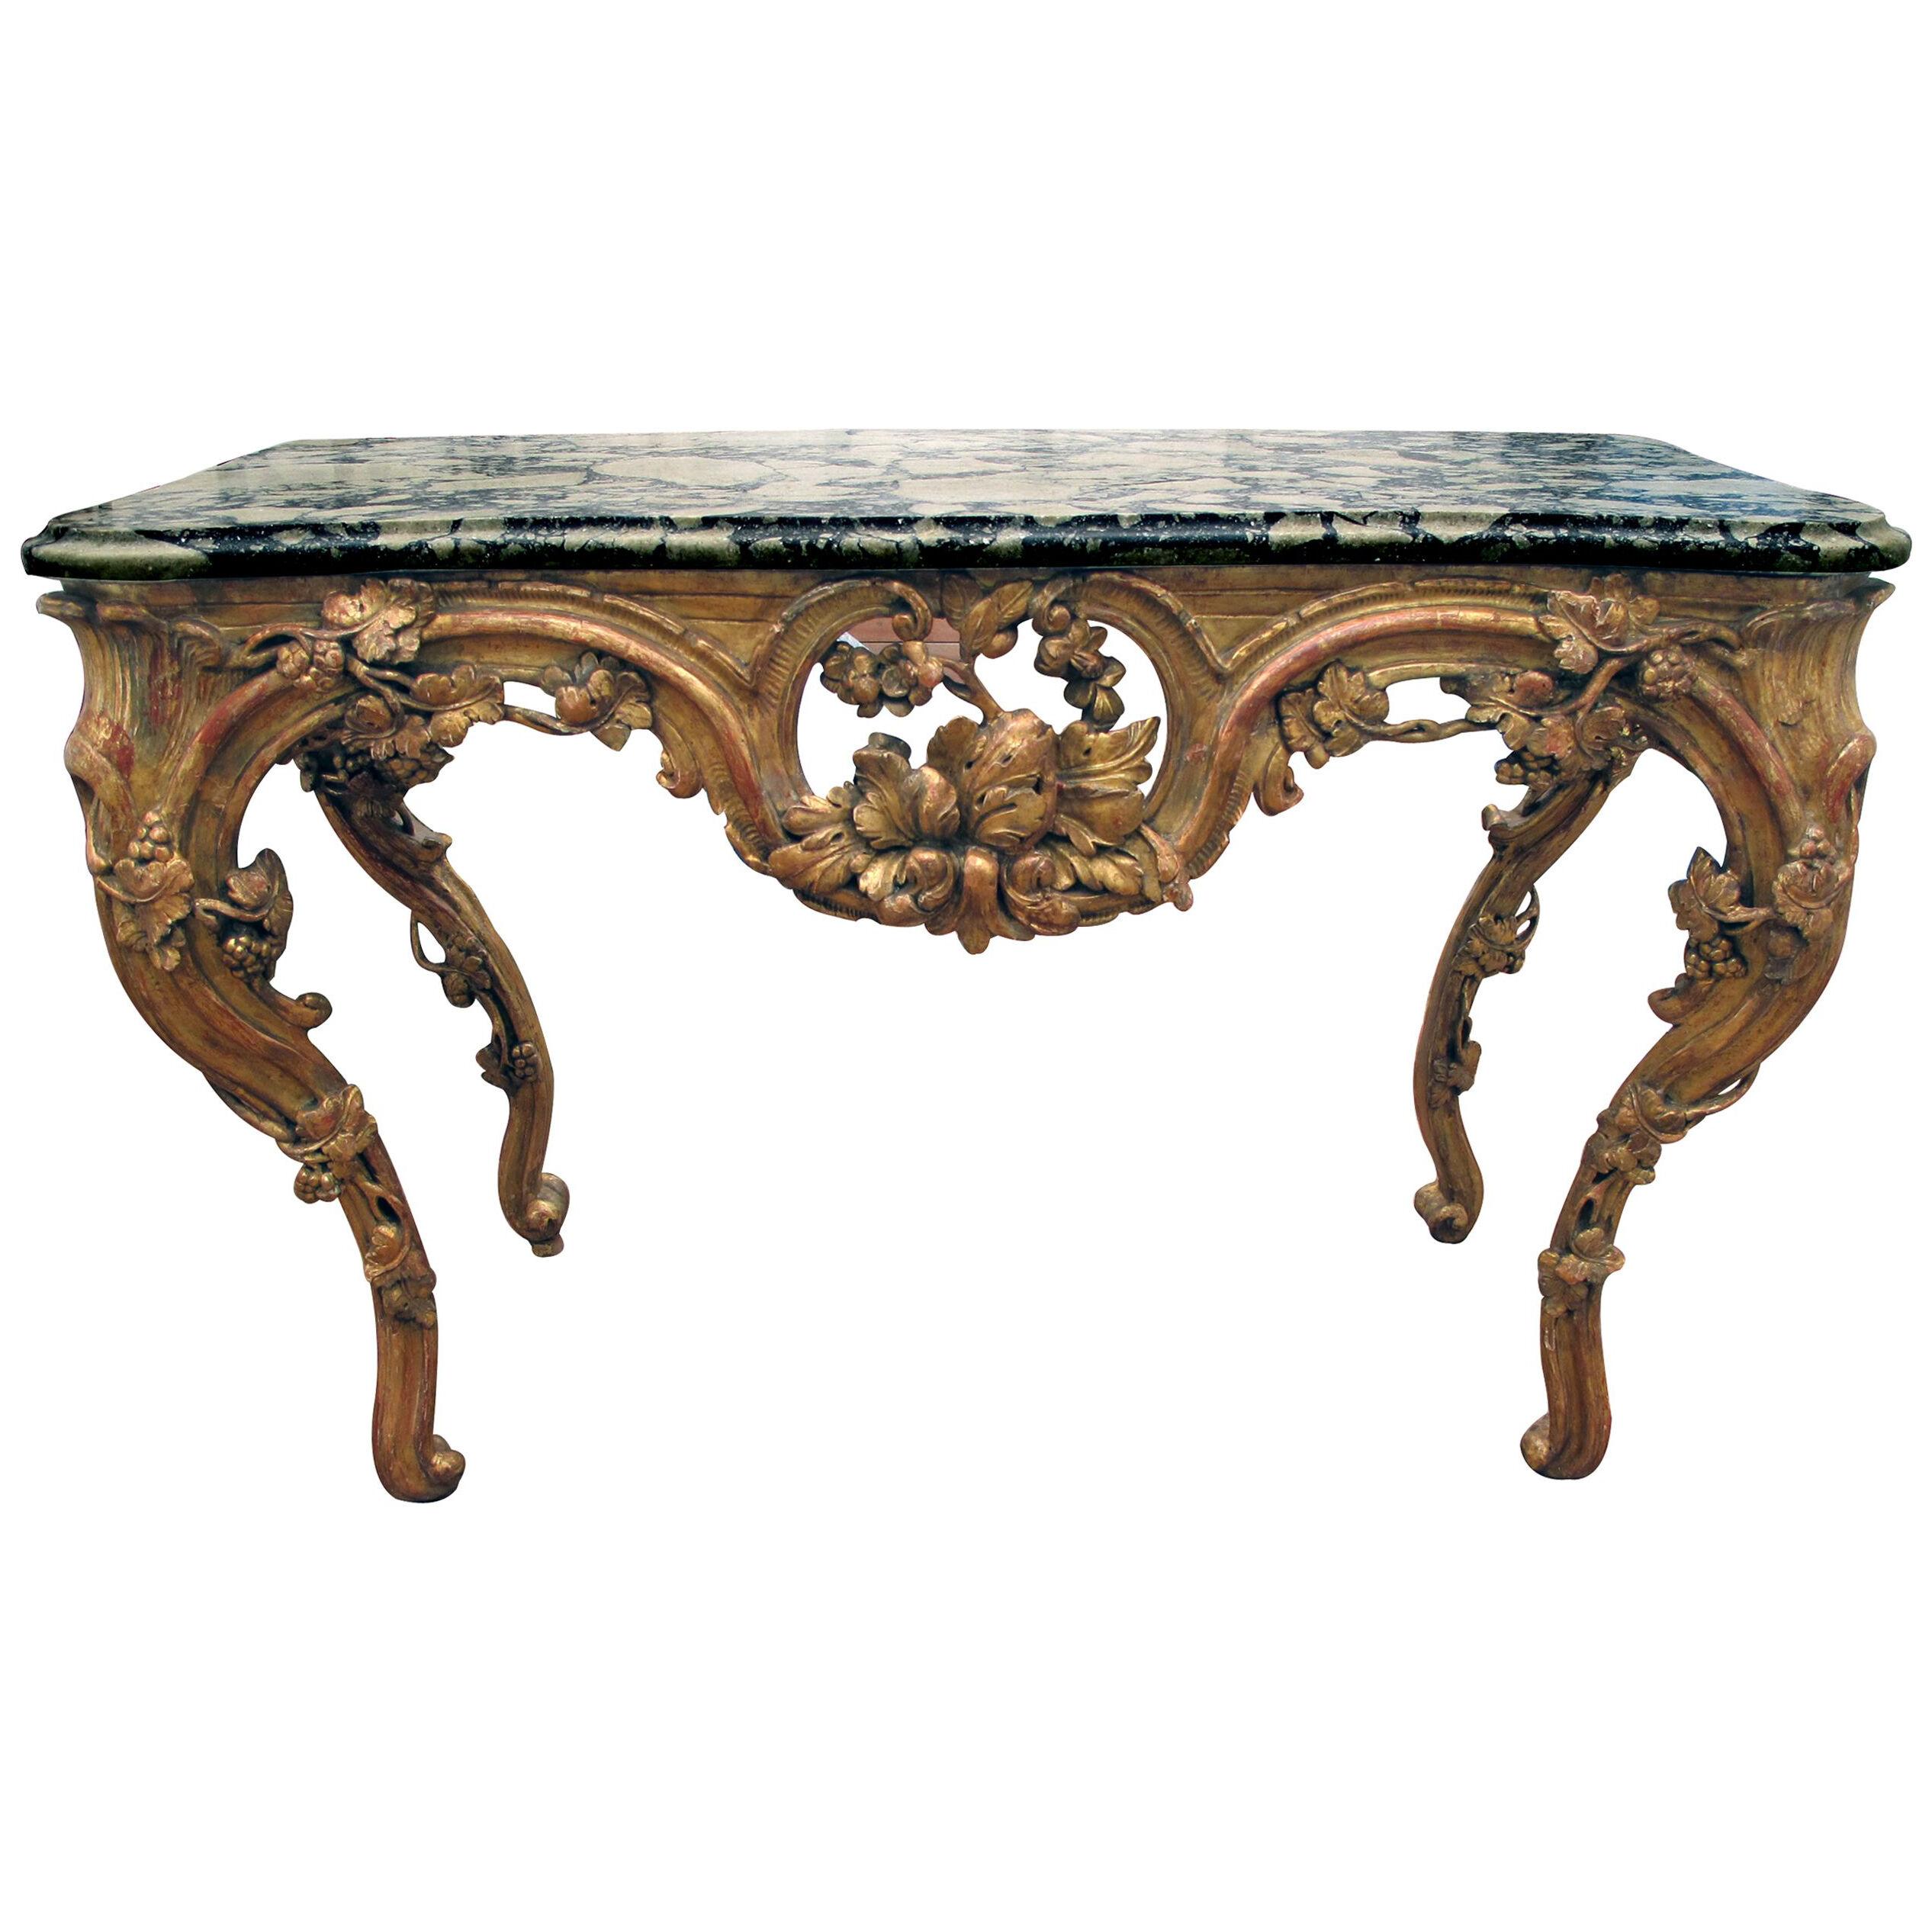 Superb French Regence Gilt-Wood Console Table w Sage Green Marble Top